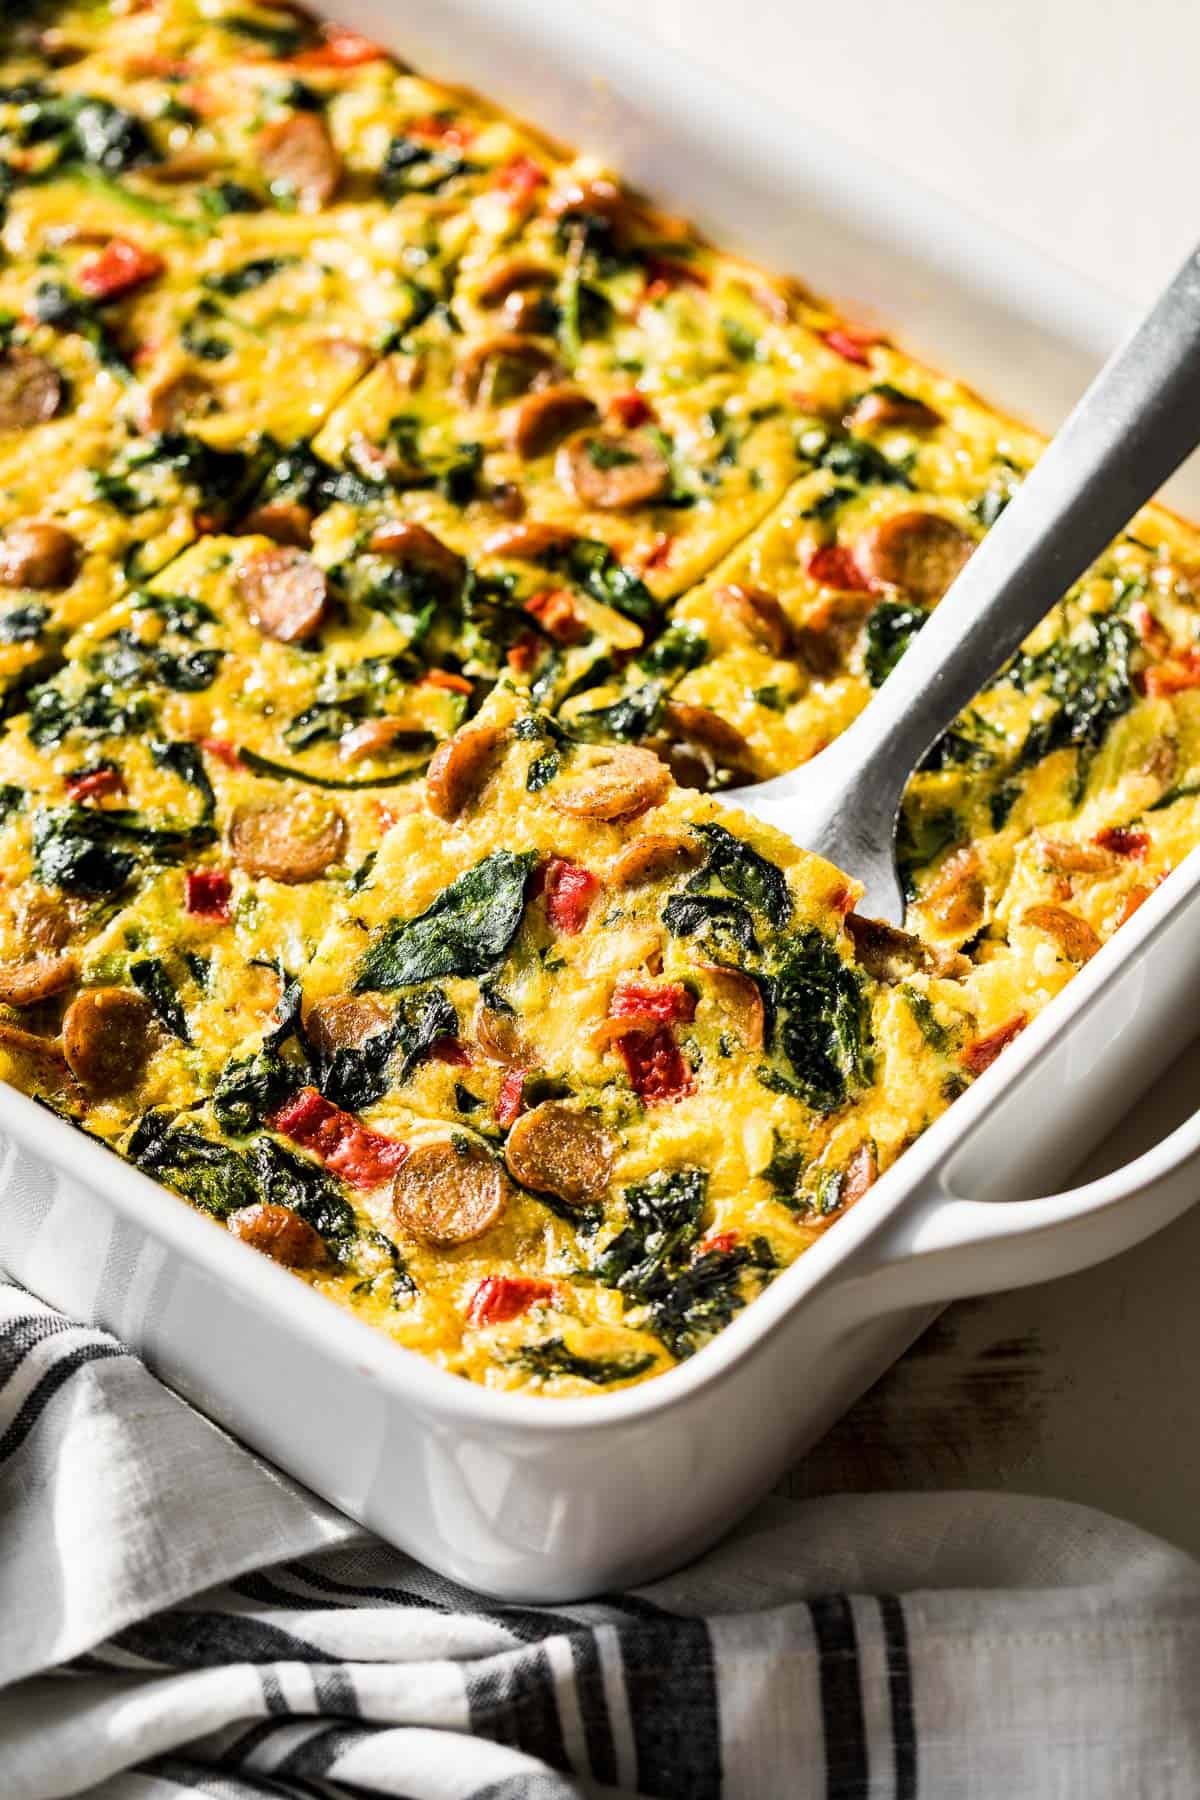 Breakfast Casserole in a large white baking dish with a metal spatula scooping up one slice.